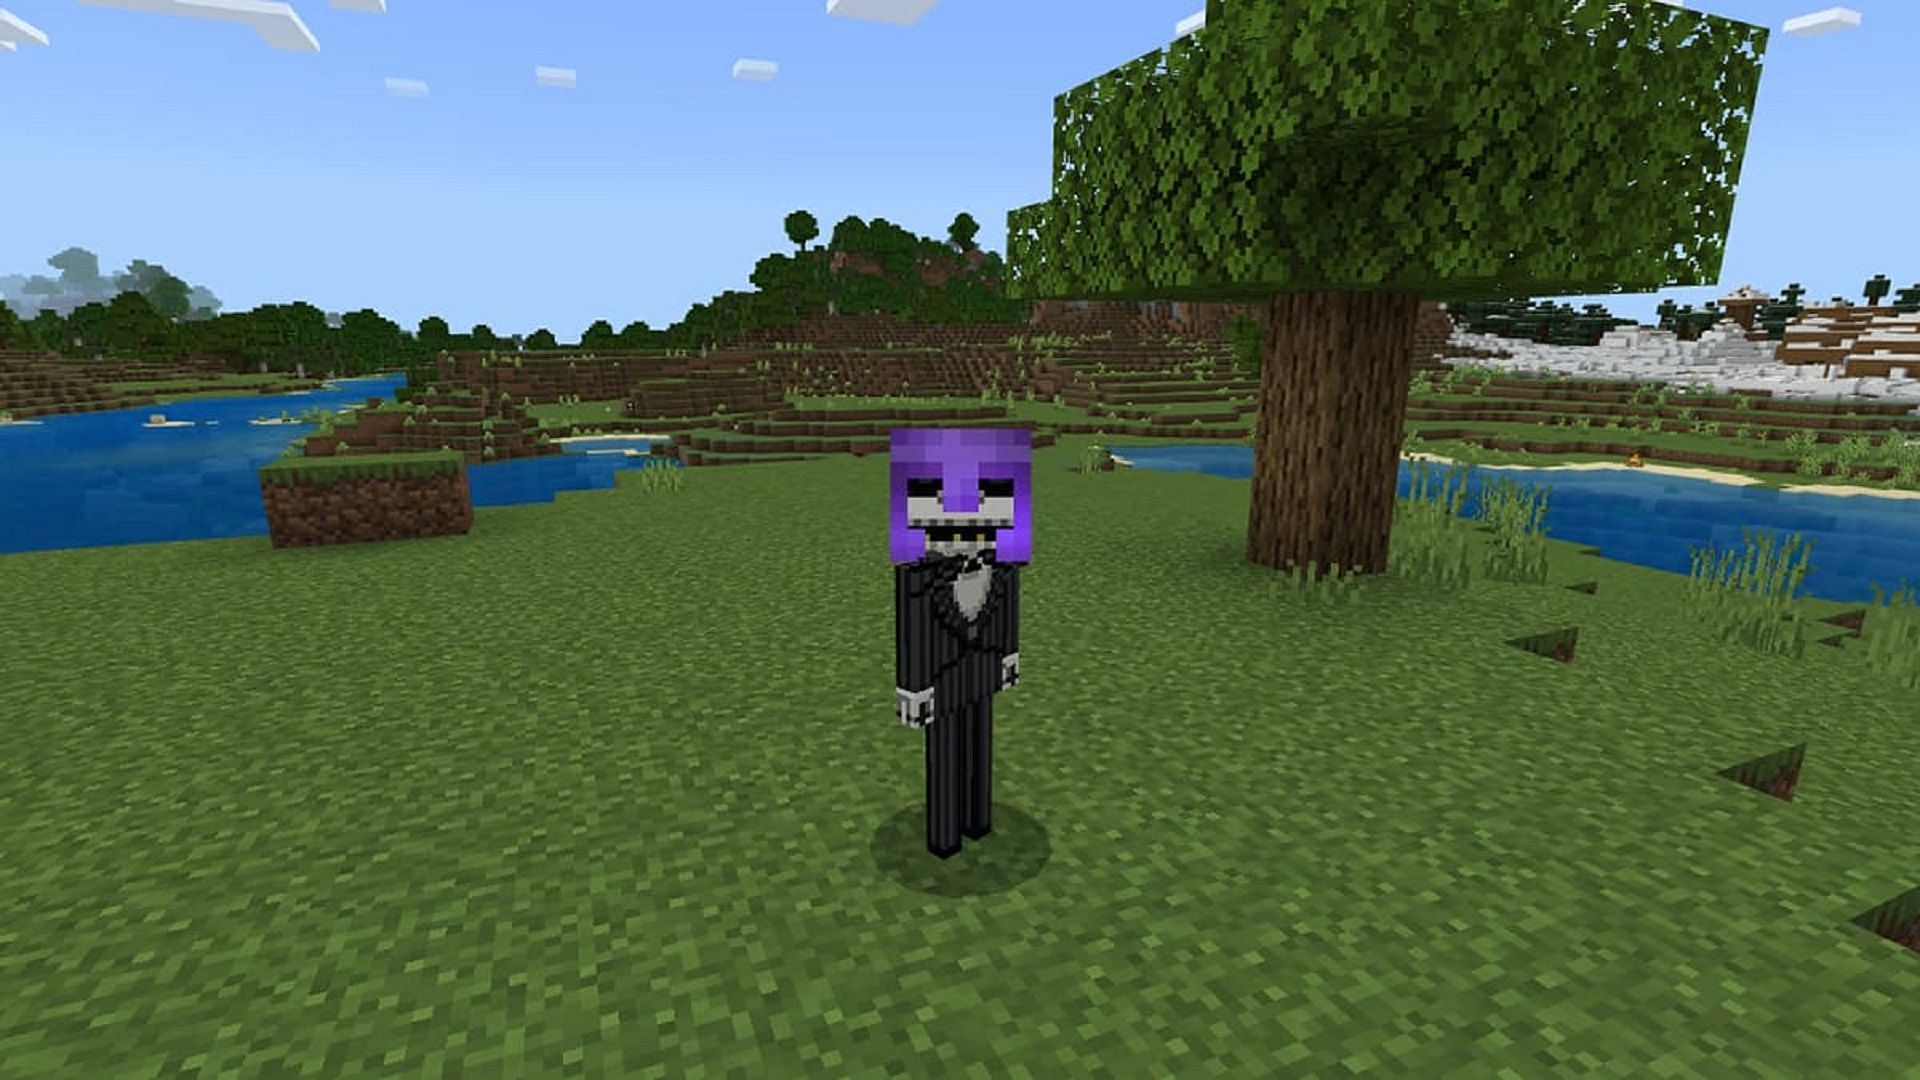 A player dons an enchanted helmet in Minecraft (Image via Mojang)